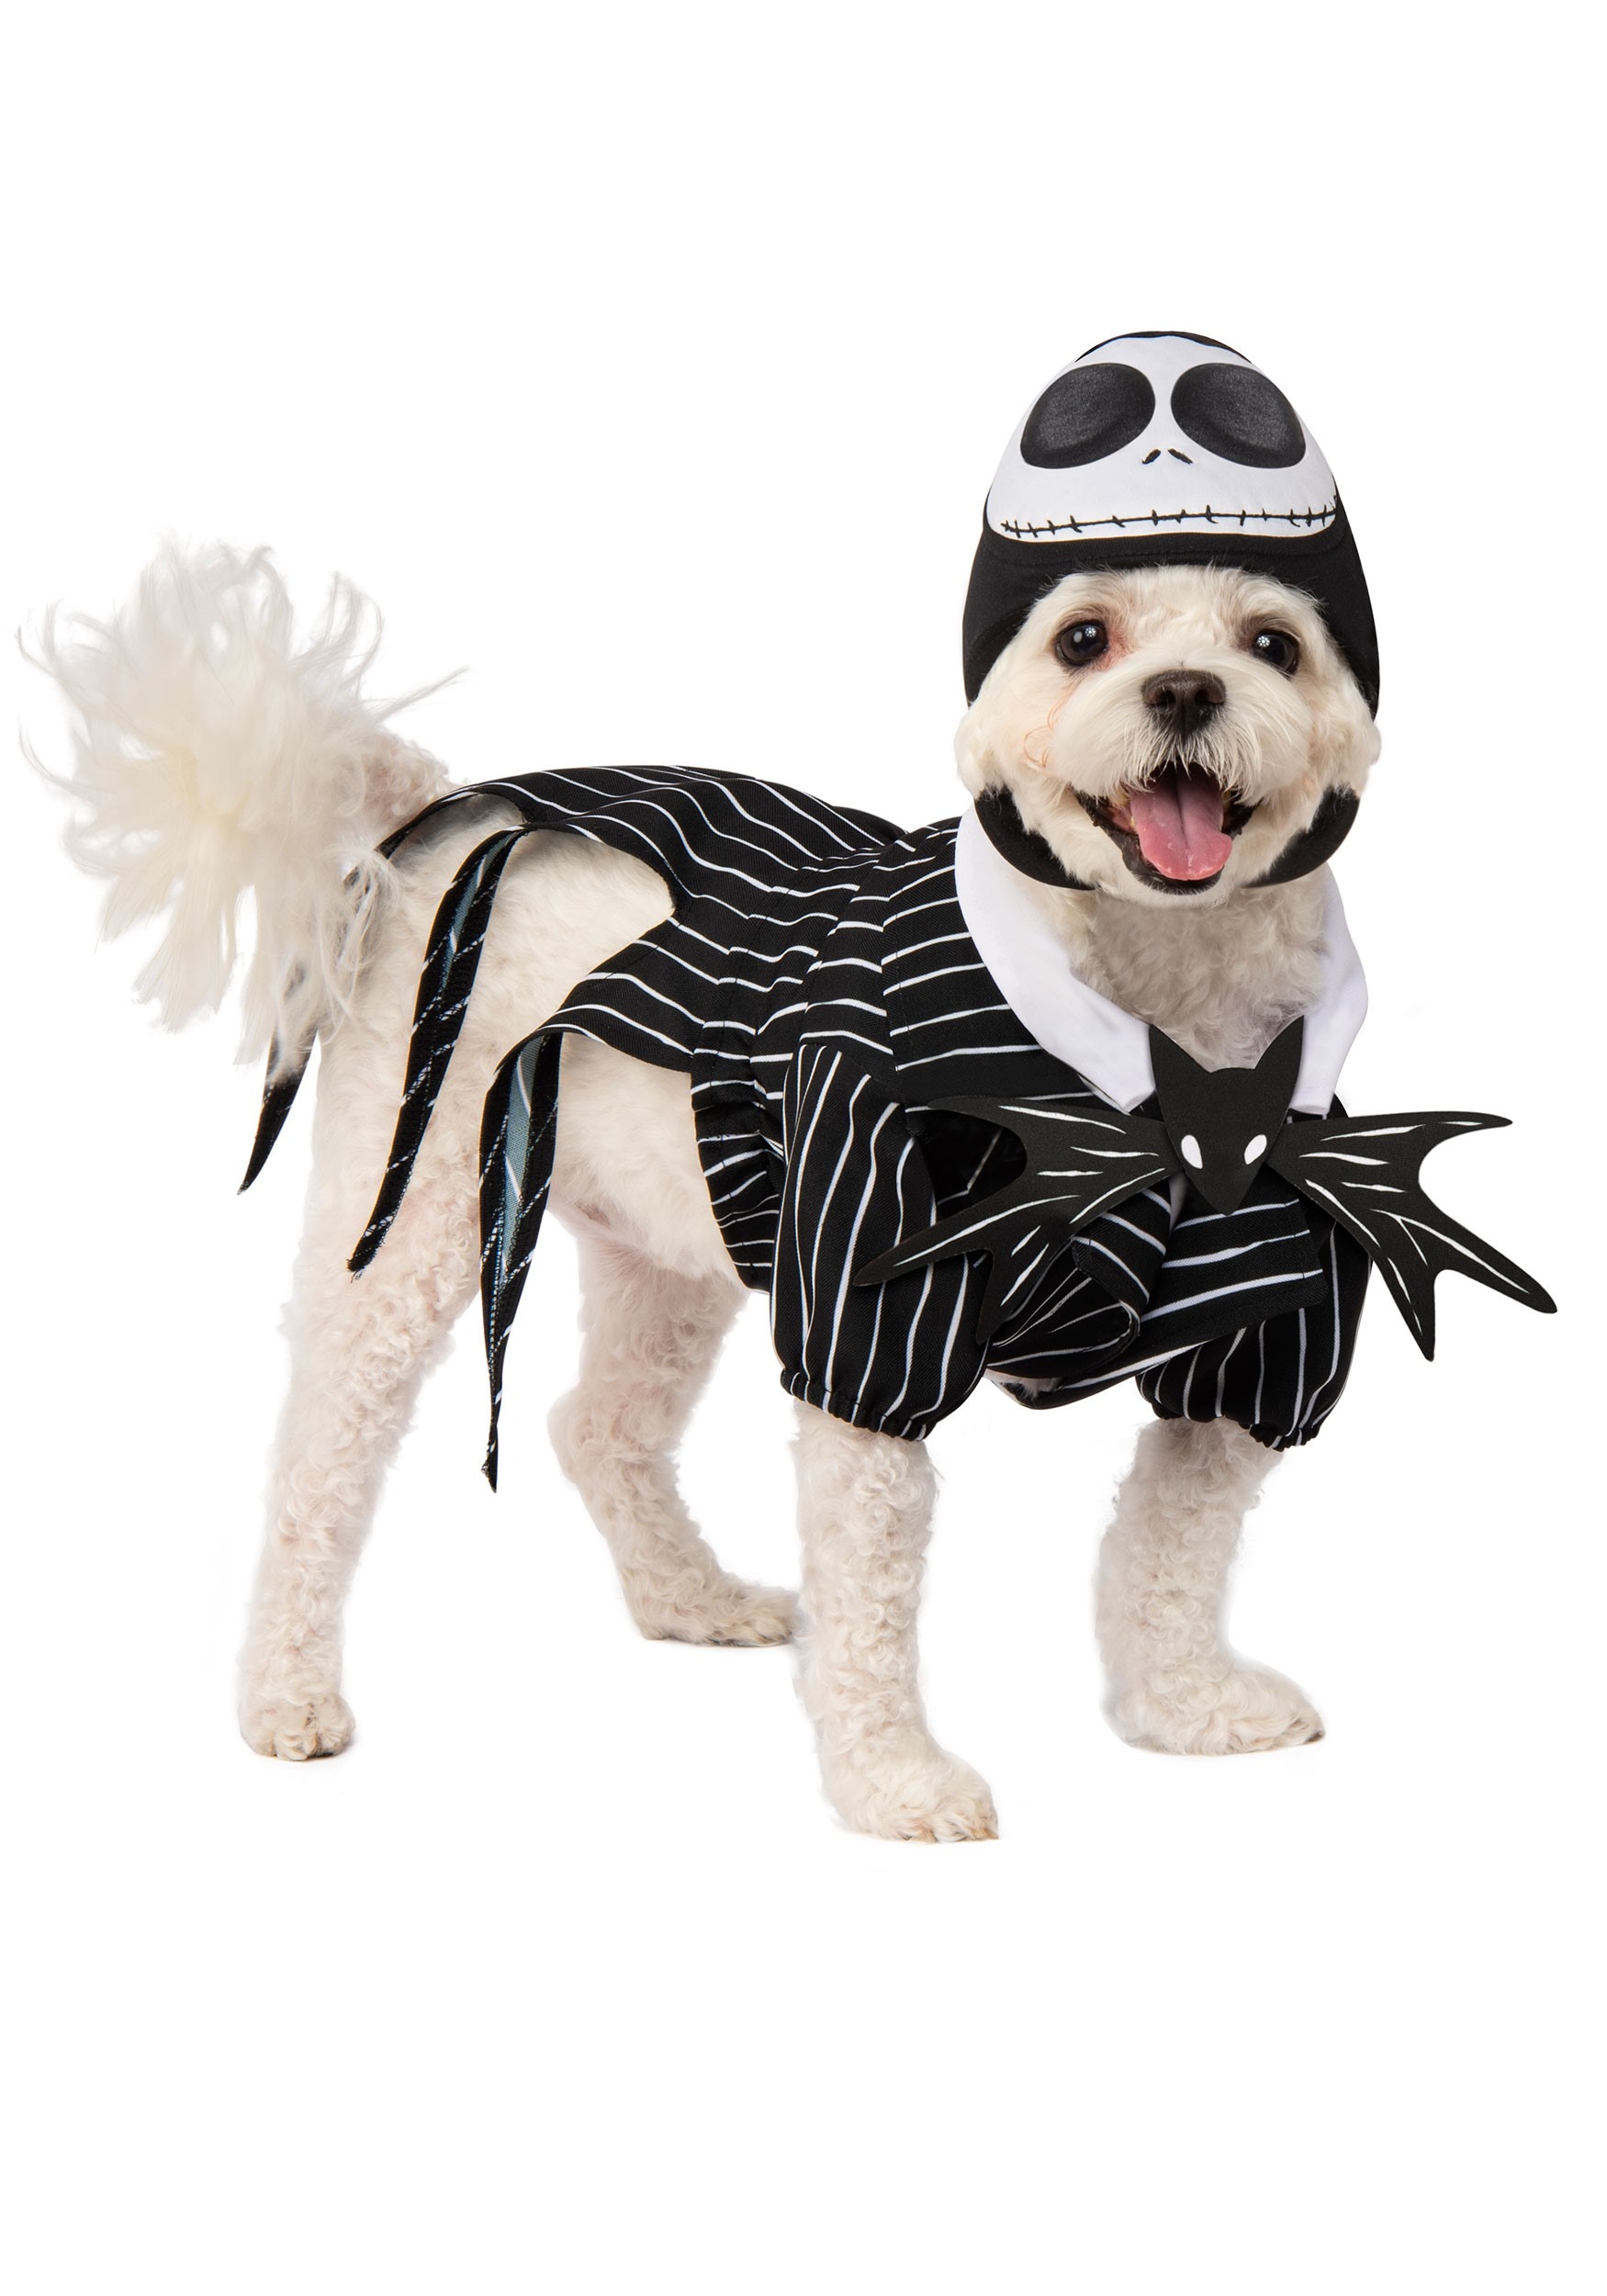 Nightmare Before Christmas Jack Skellington Costume For Dogs